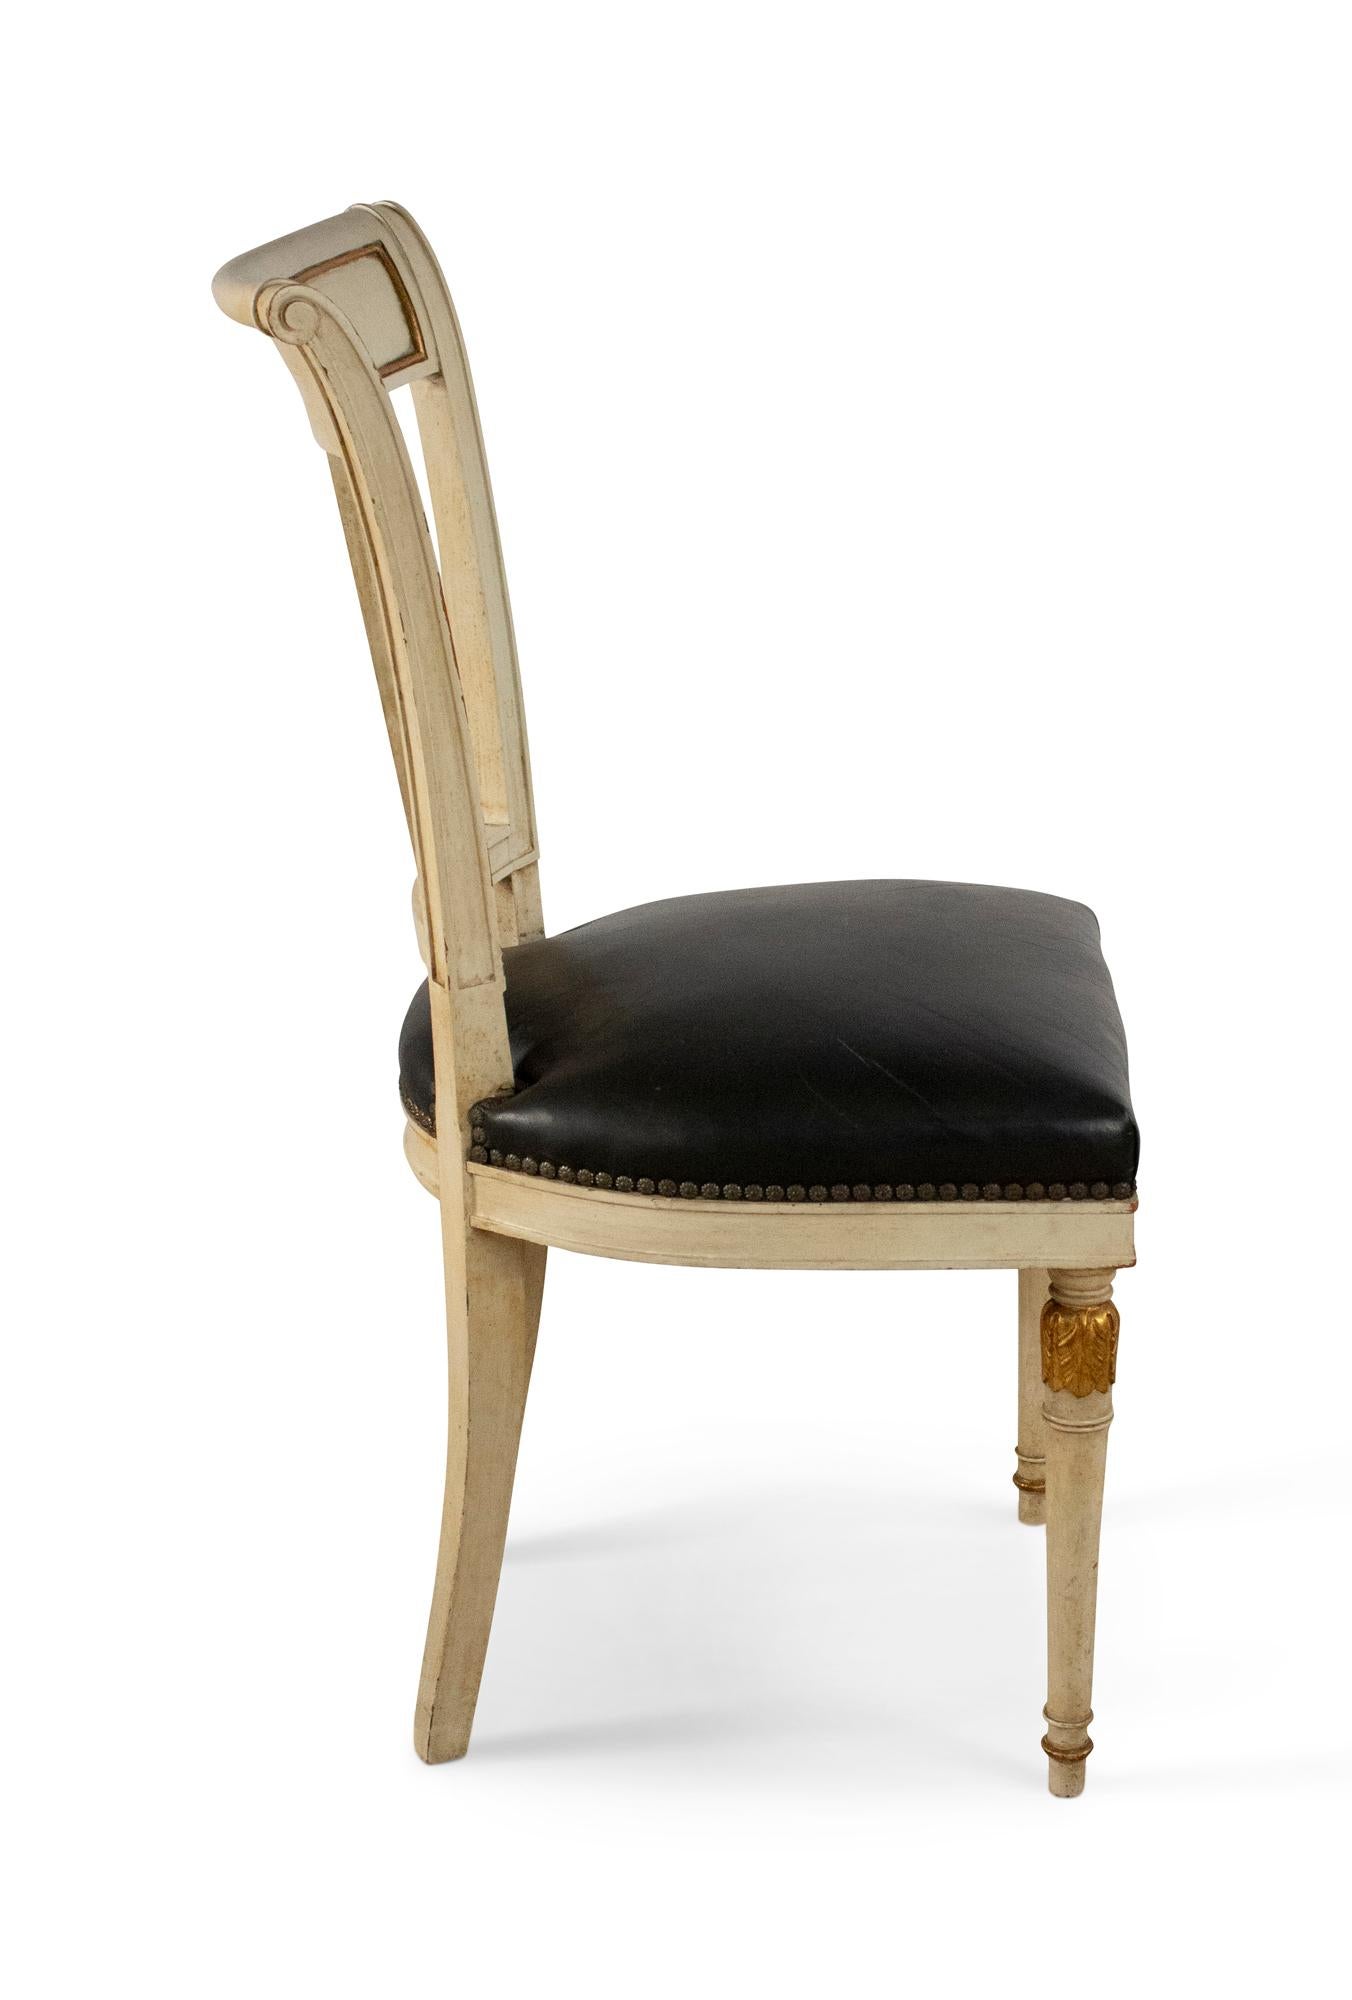 Jansen French Directoire Style Beige and Gilt Painted Wood and Black Leather 3